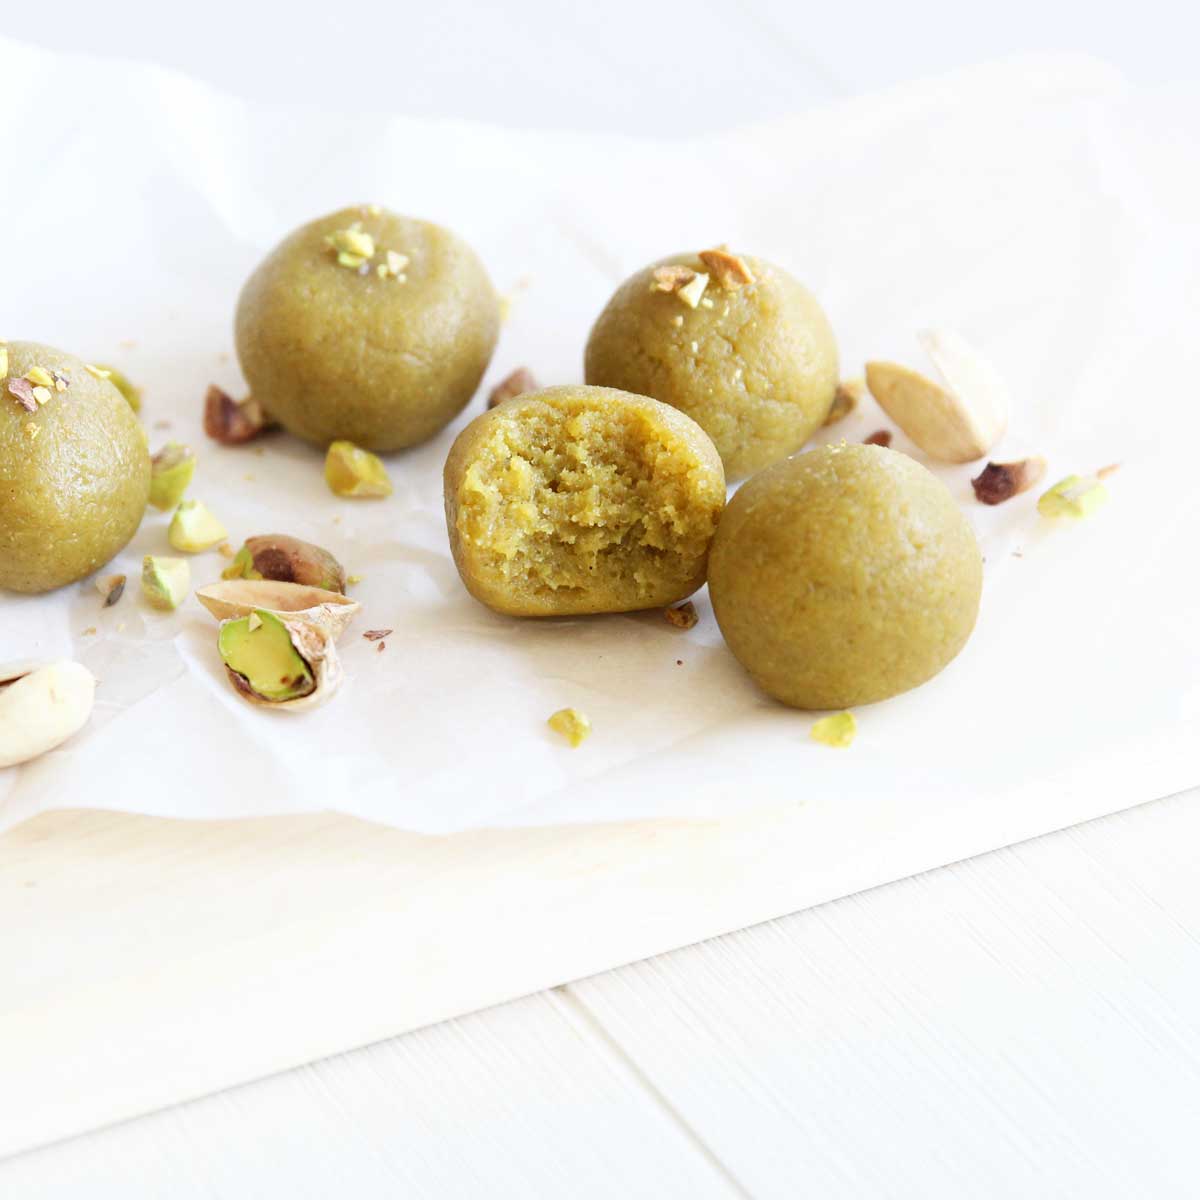 Keto Pistachio Cheesecake Protein Balls (Low Carb Energy Bites made with Collagen Peptides) - Pistachio Nice Cream